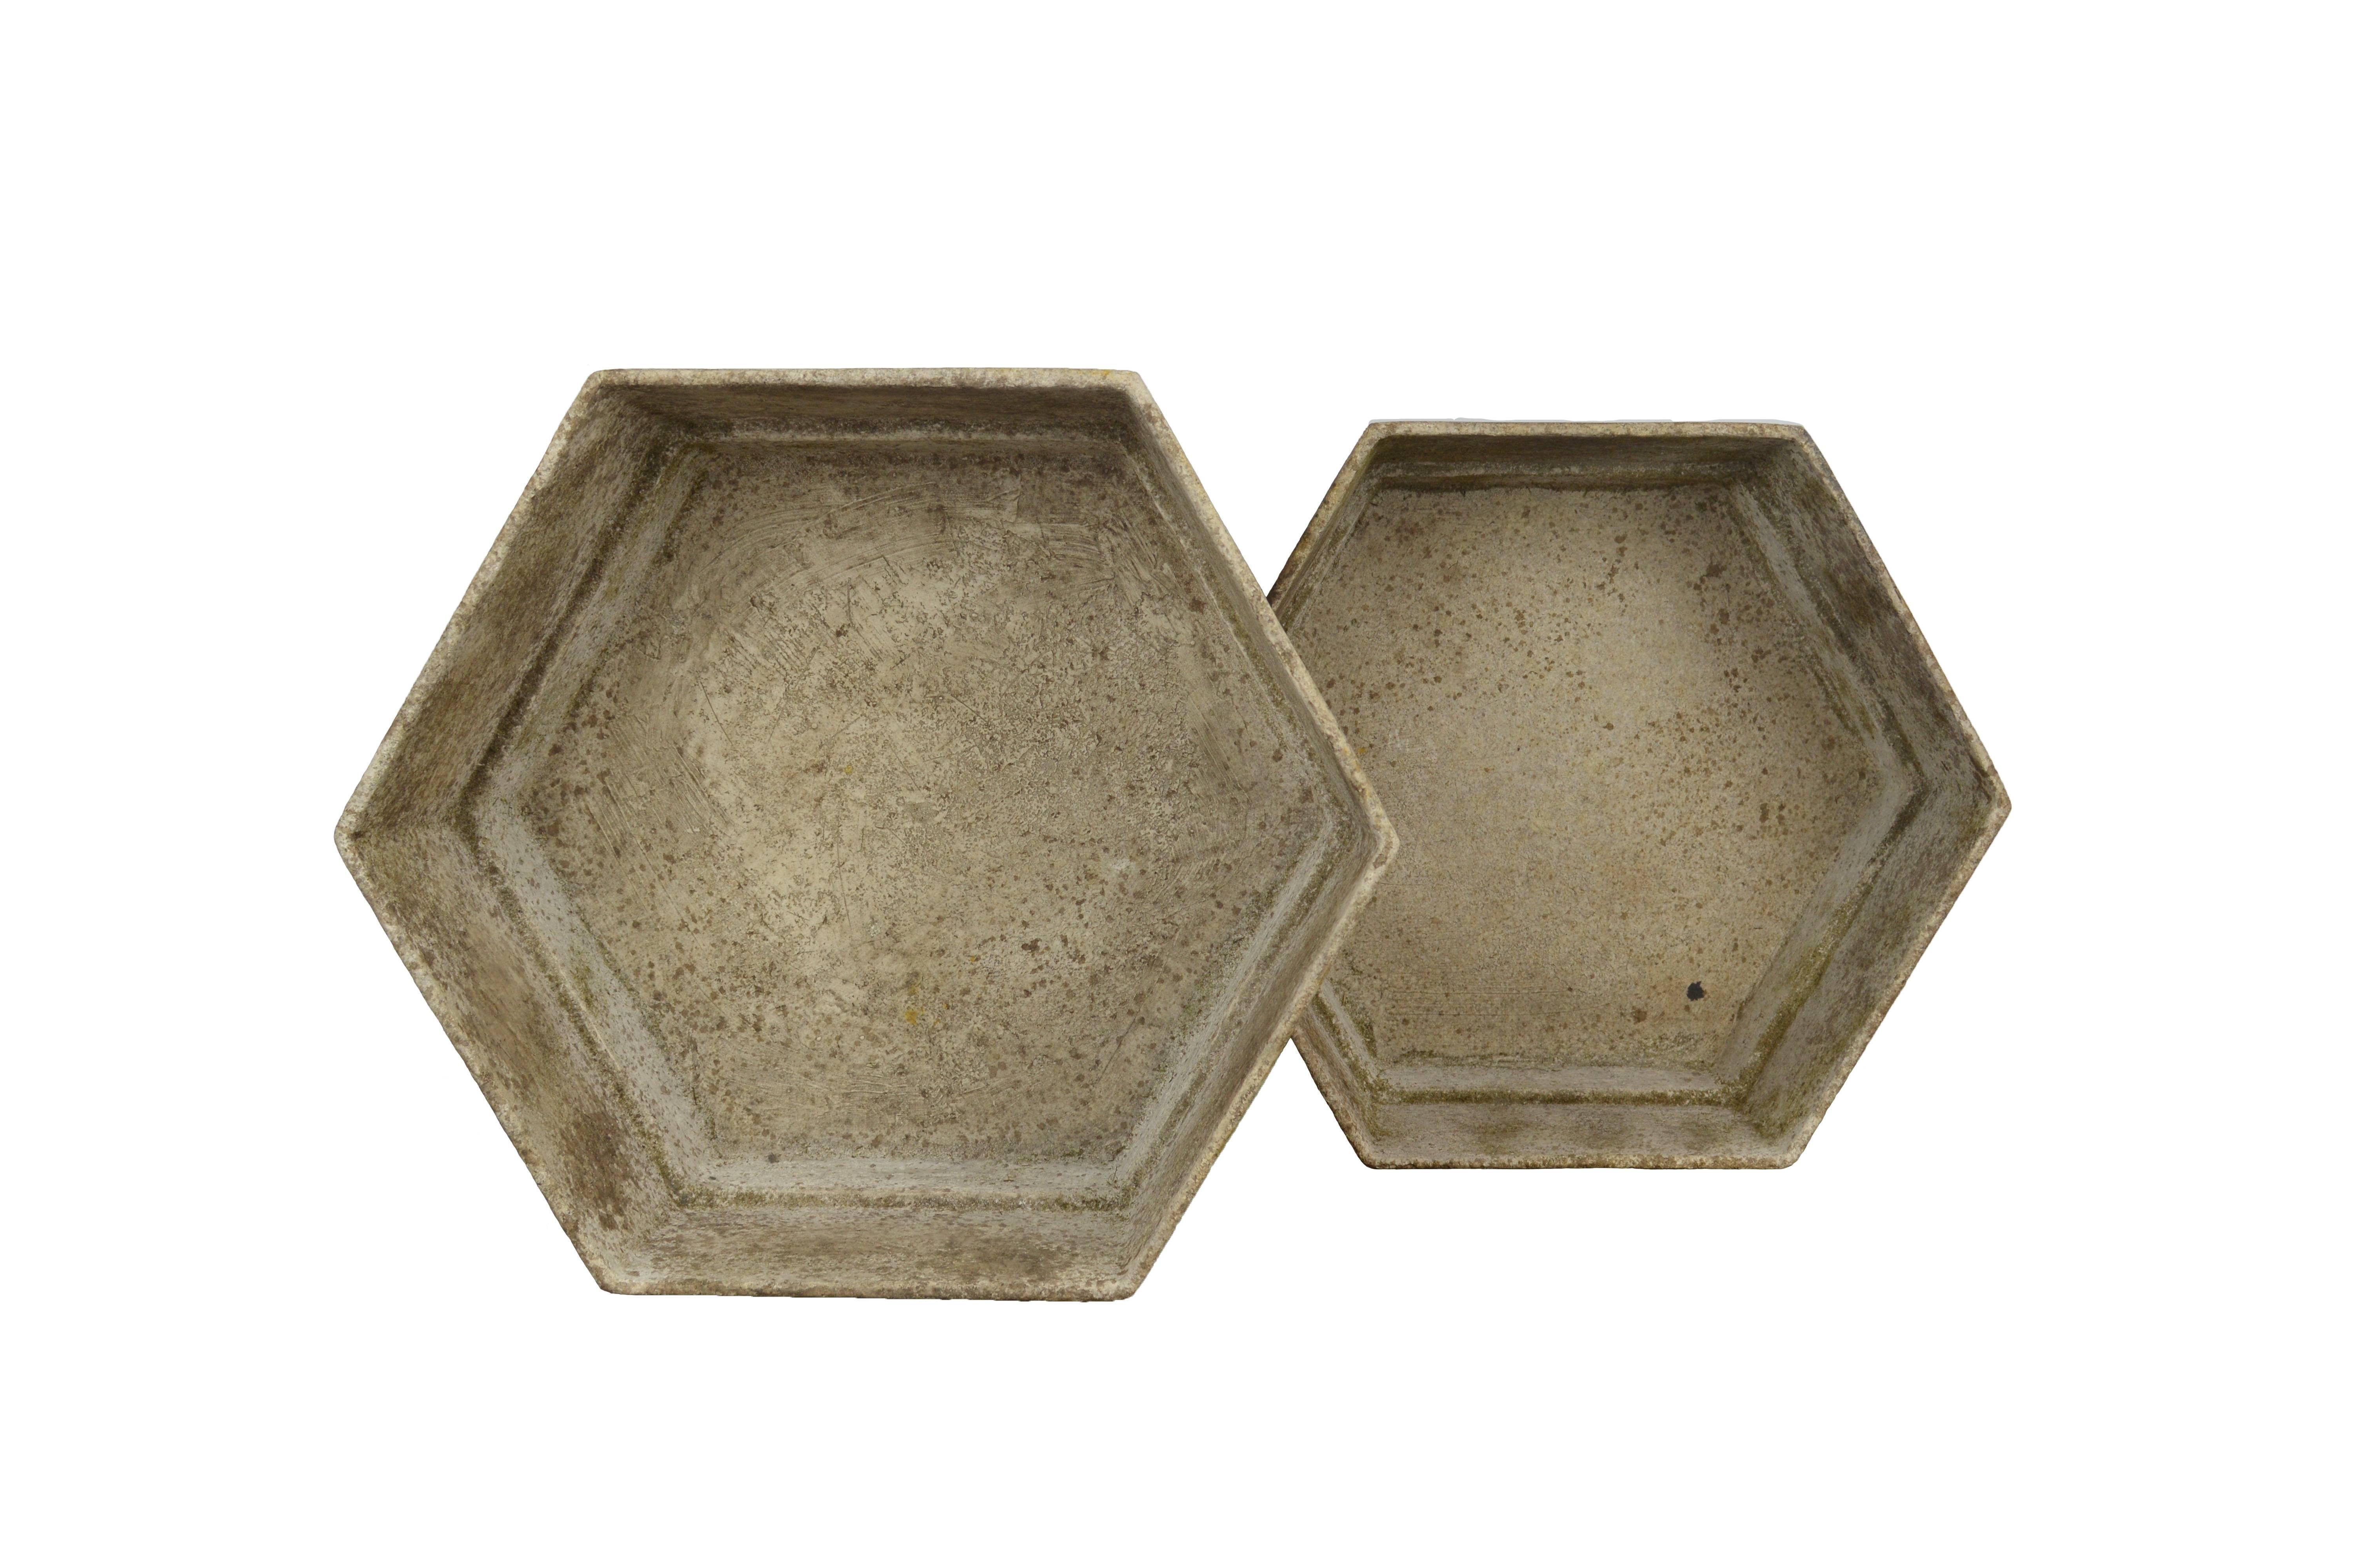 Hexagonal Fiber cement planters in the style of Willy Guhl